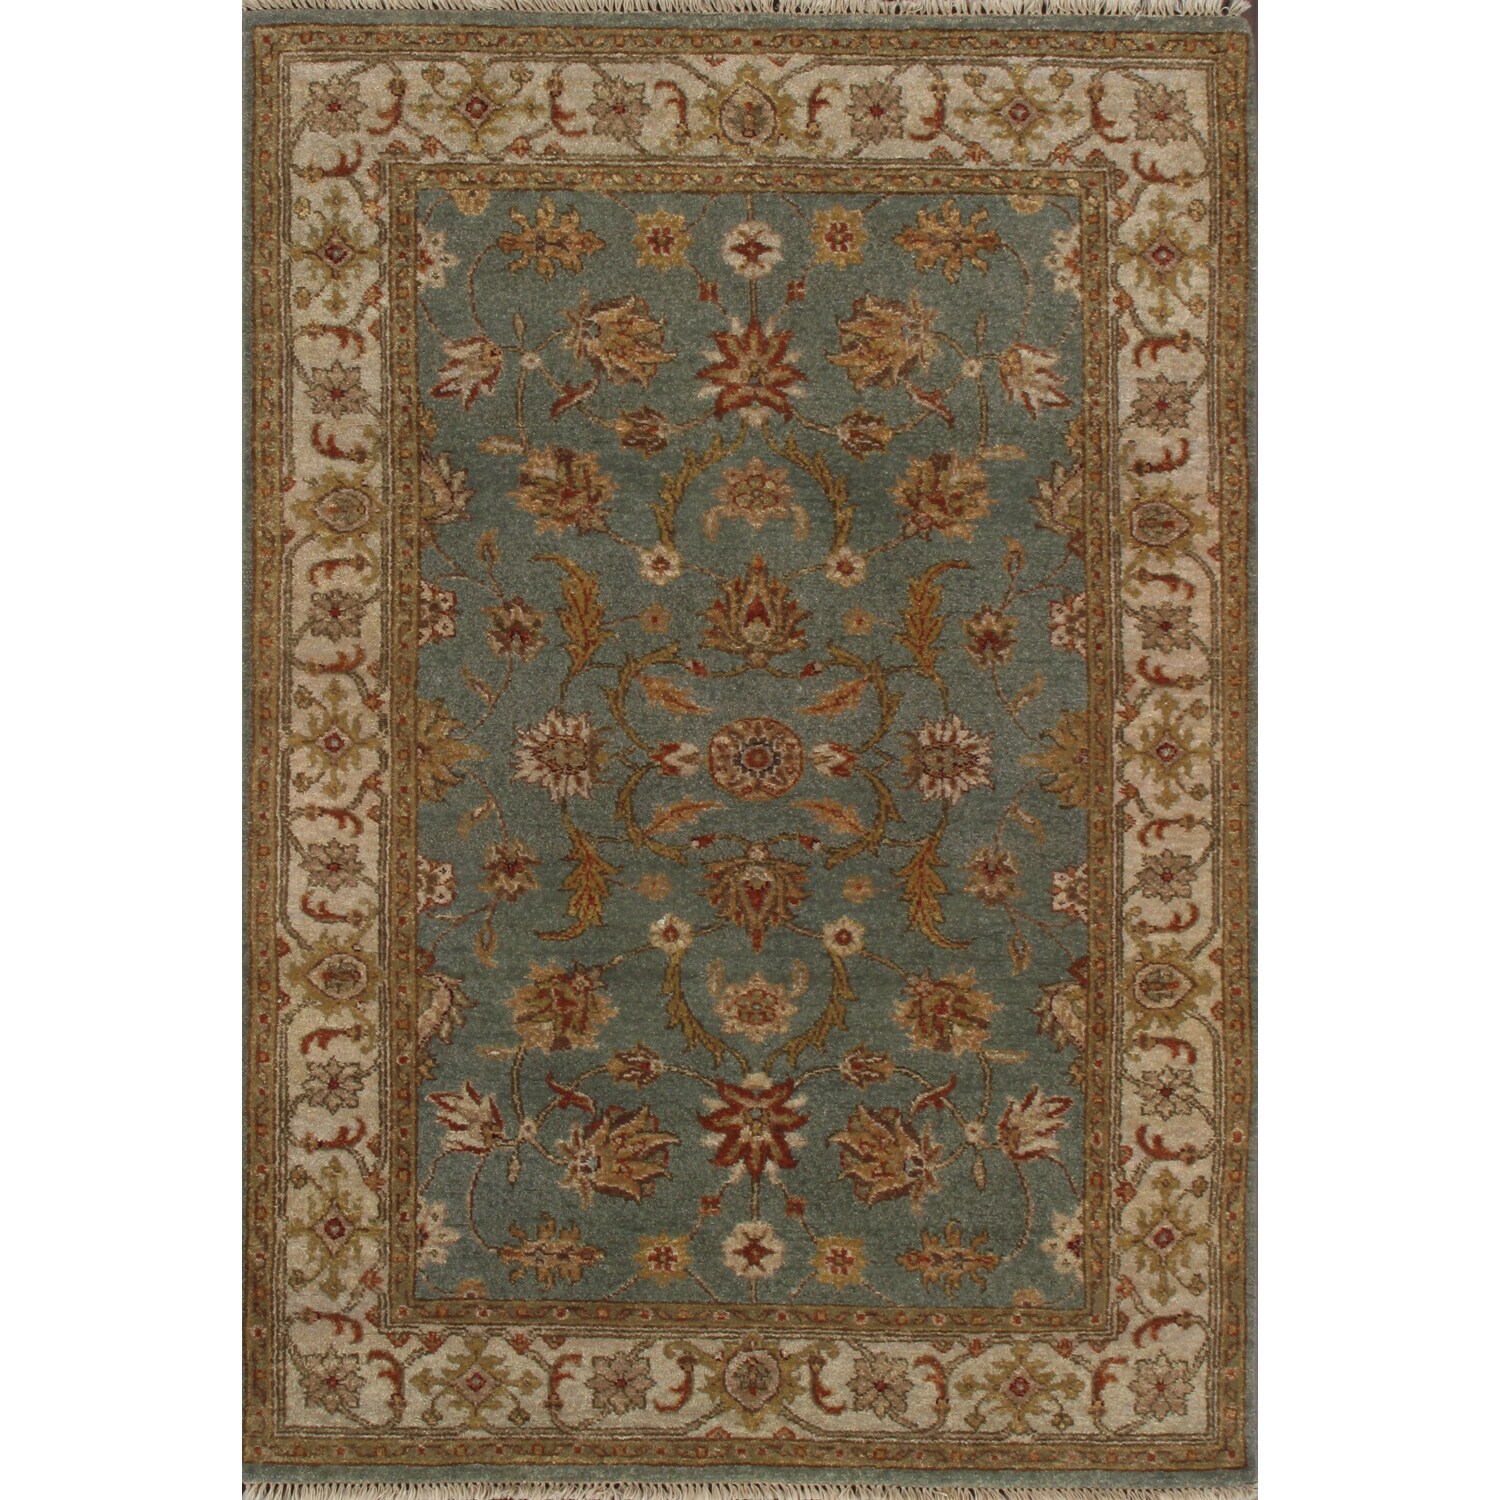 Hand knotted Ziegler Blue Beige Vegetable Dyes Wool Rug (10 X 14)